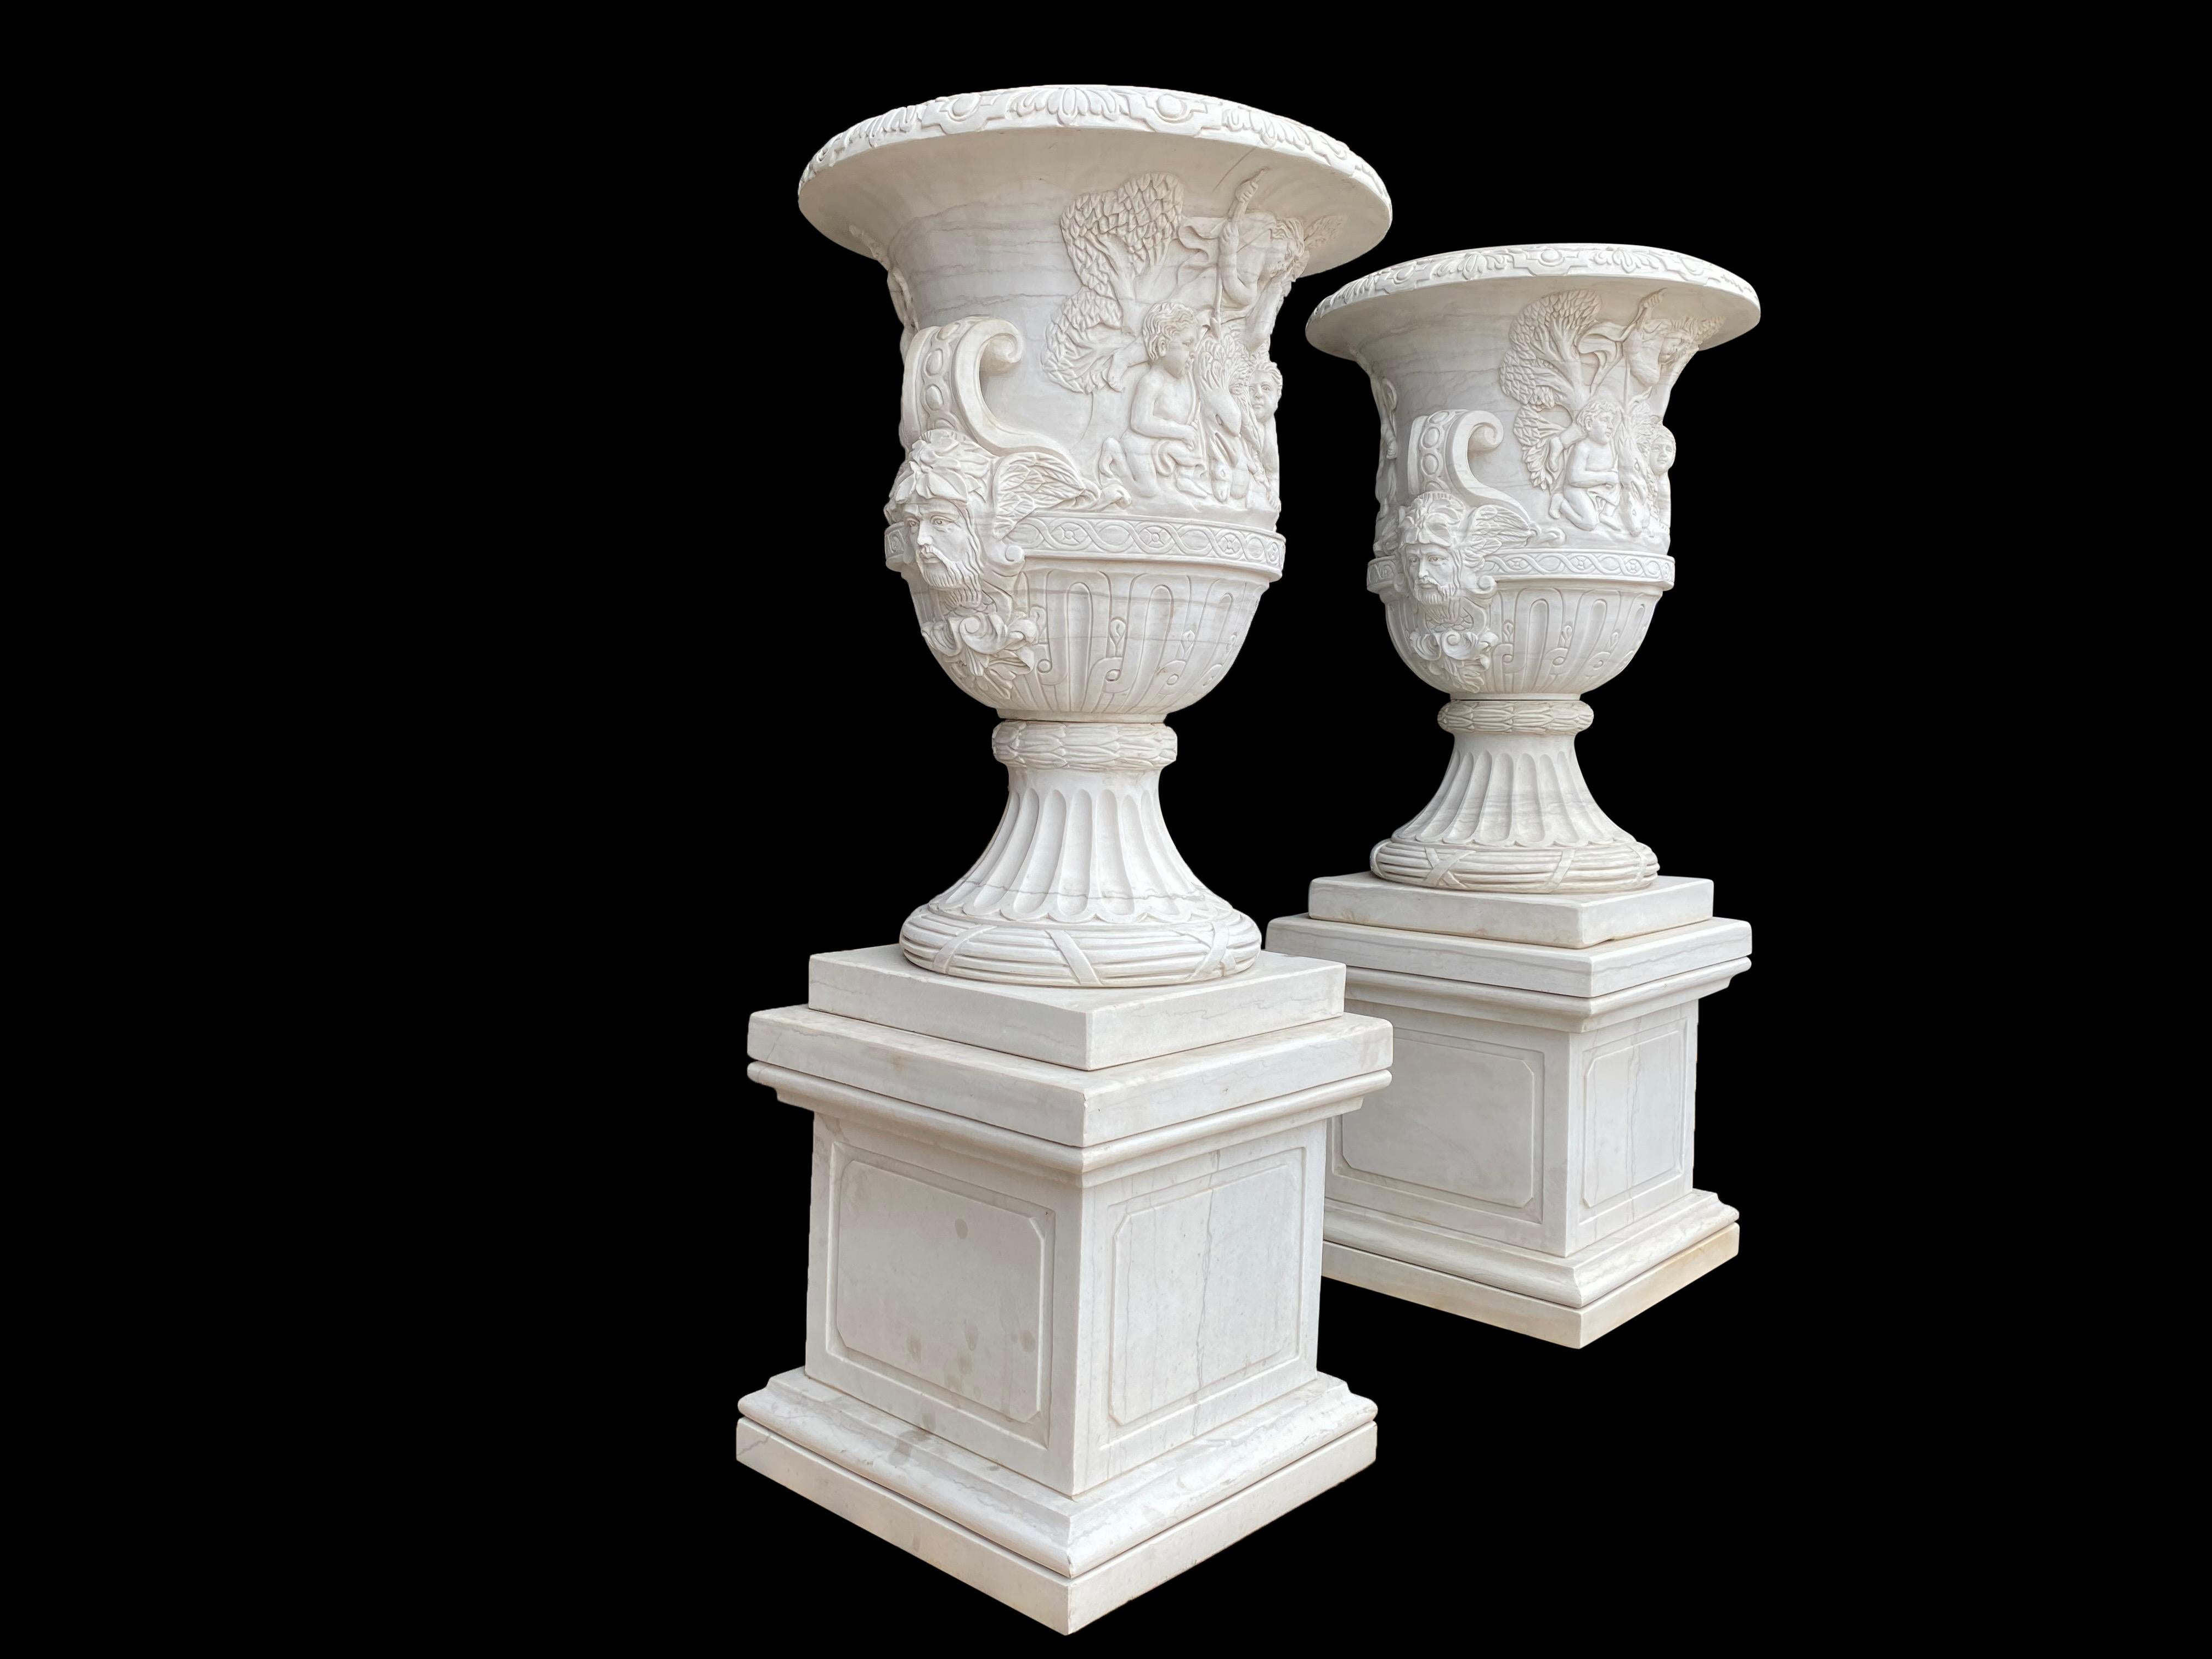 Contemporary Pair of White Carrara Marble Campana-form Urns, 21st Century For Sale